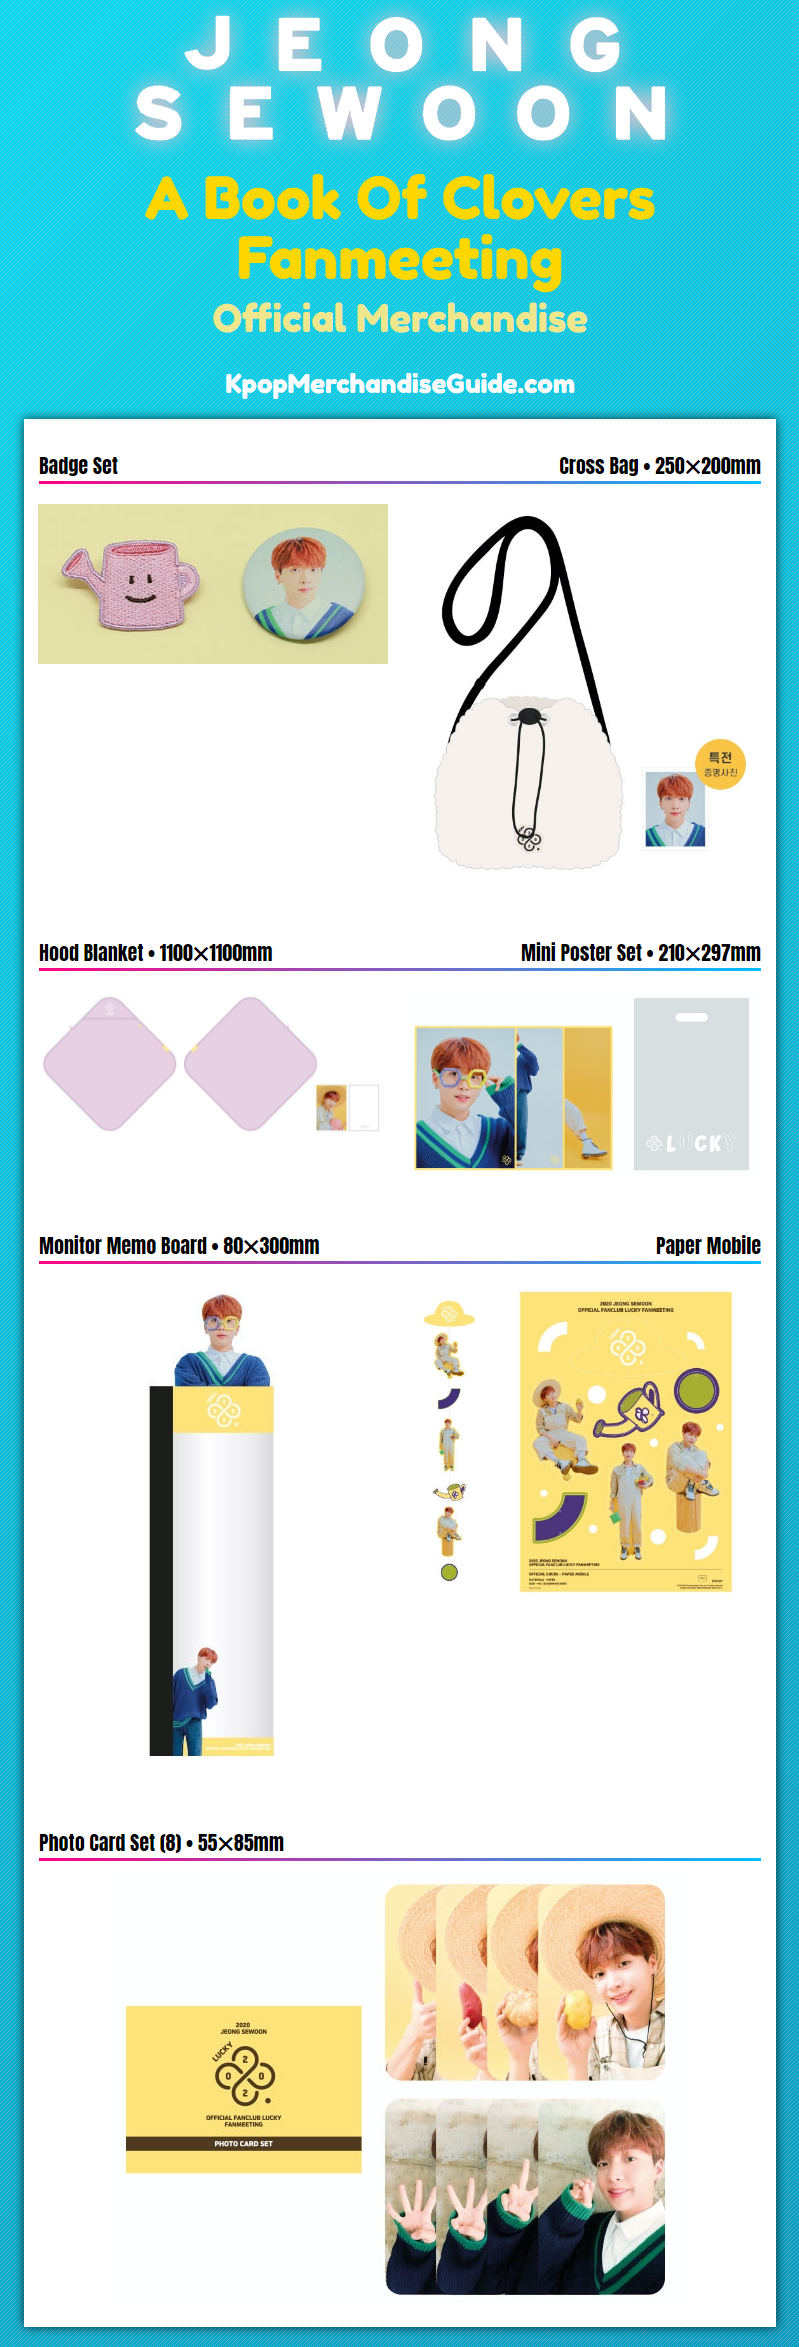 Jeong Se Woon A Book Of Clovers Fanmeeting Merchandise